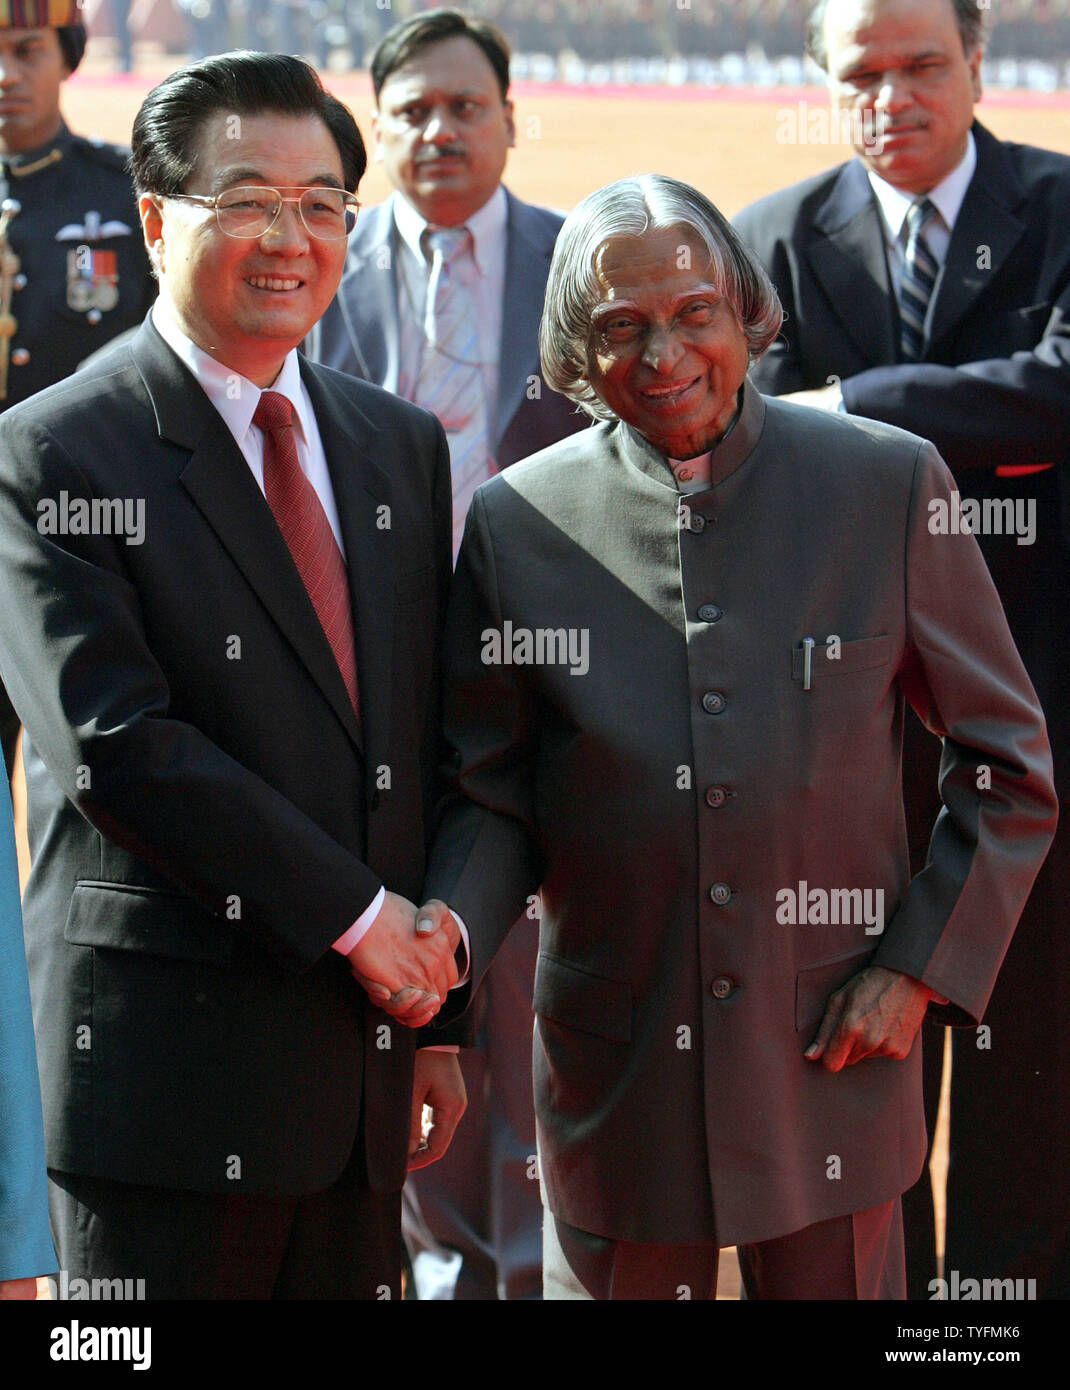 Chinese President Hu Jintao (L) shakes hands with his Indian counterpart Abdul Kalam during a welcoming ceremony in New Delhi, November 21, 2006. Hu Jintao is in India on a four-day official visit.   (UPI Photo/Kamal Kishore) Stock Photo